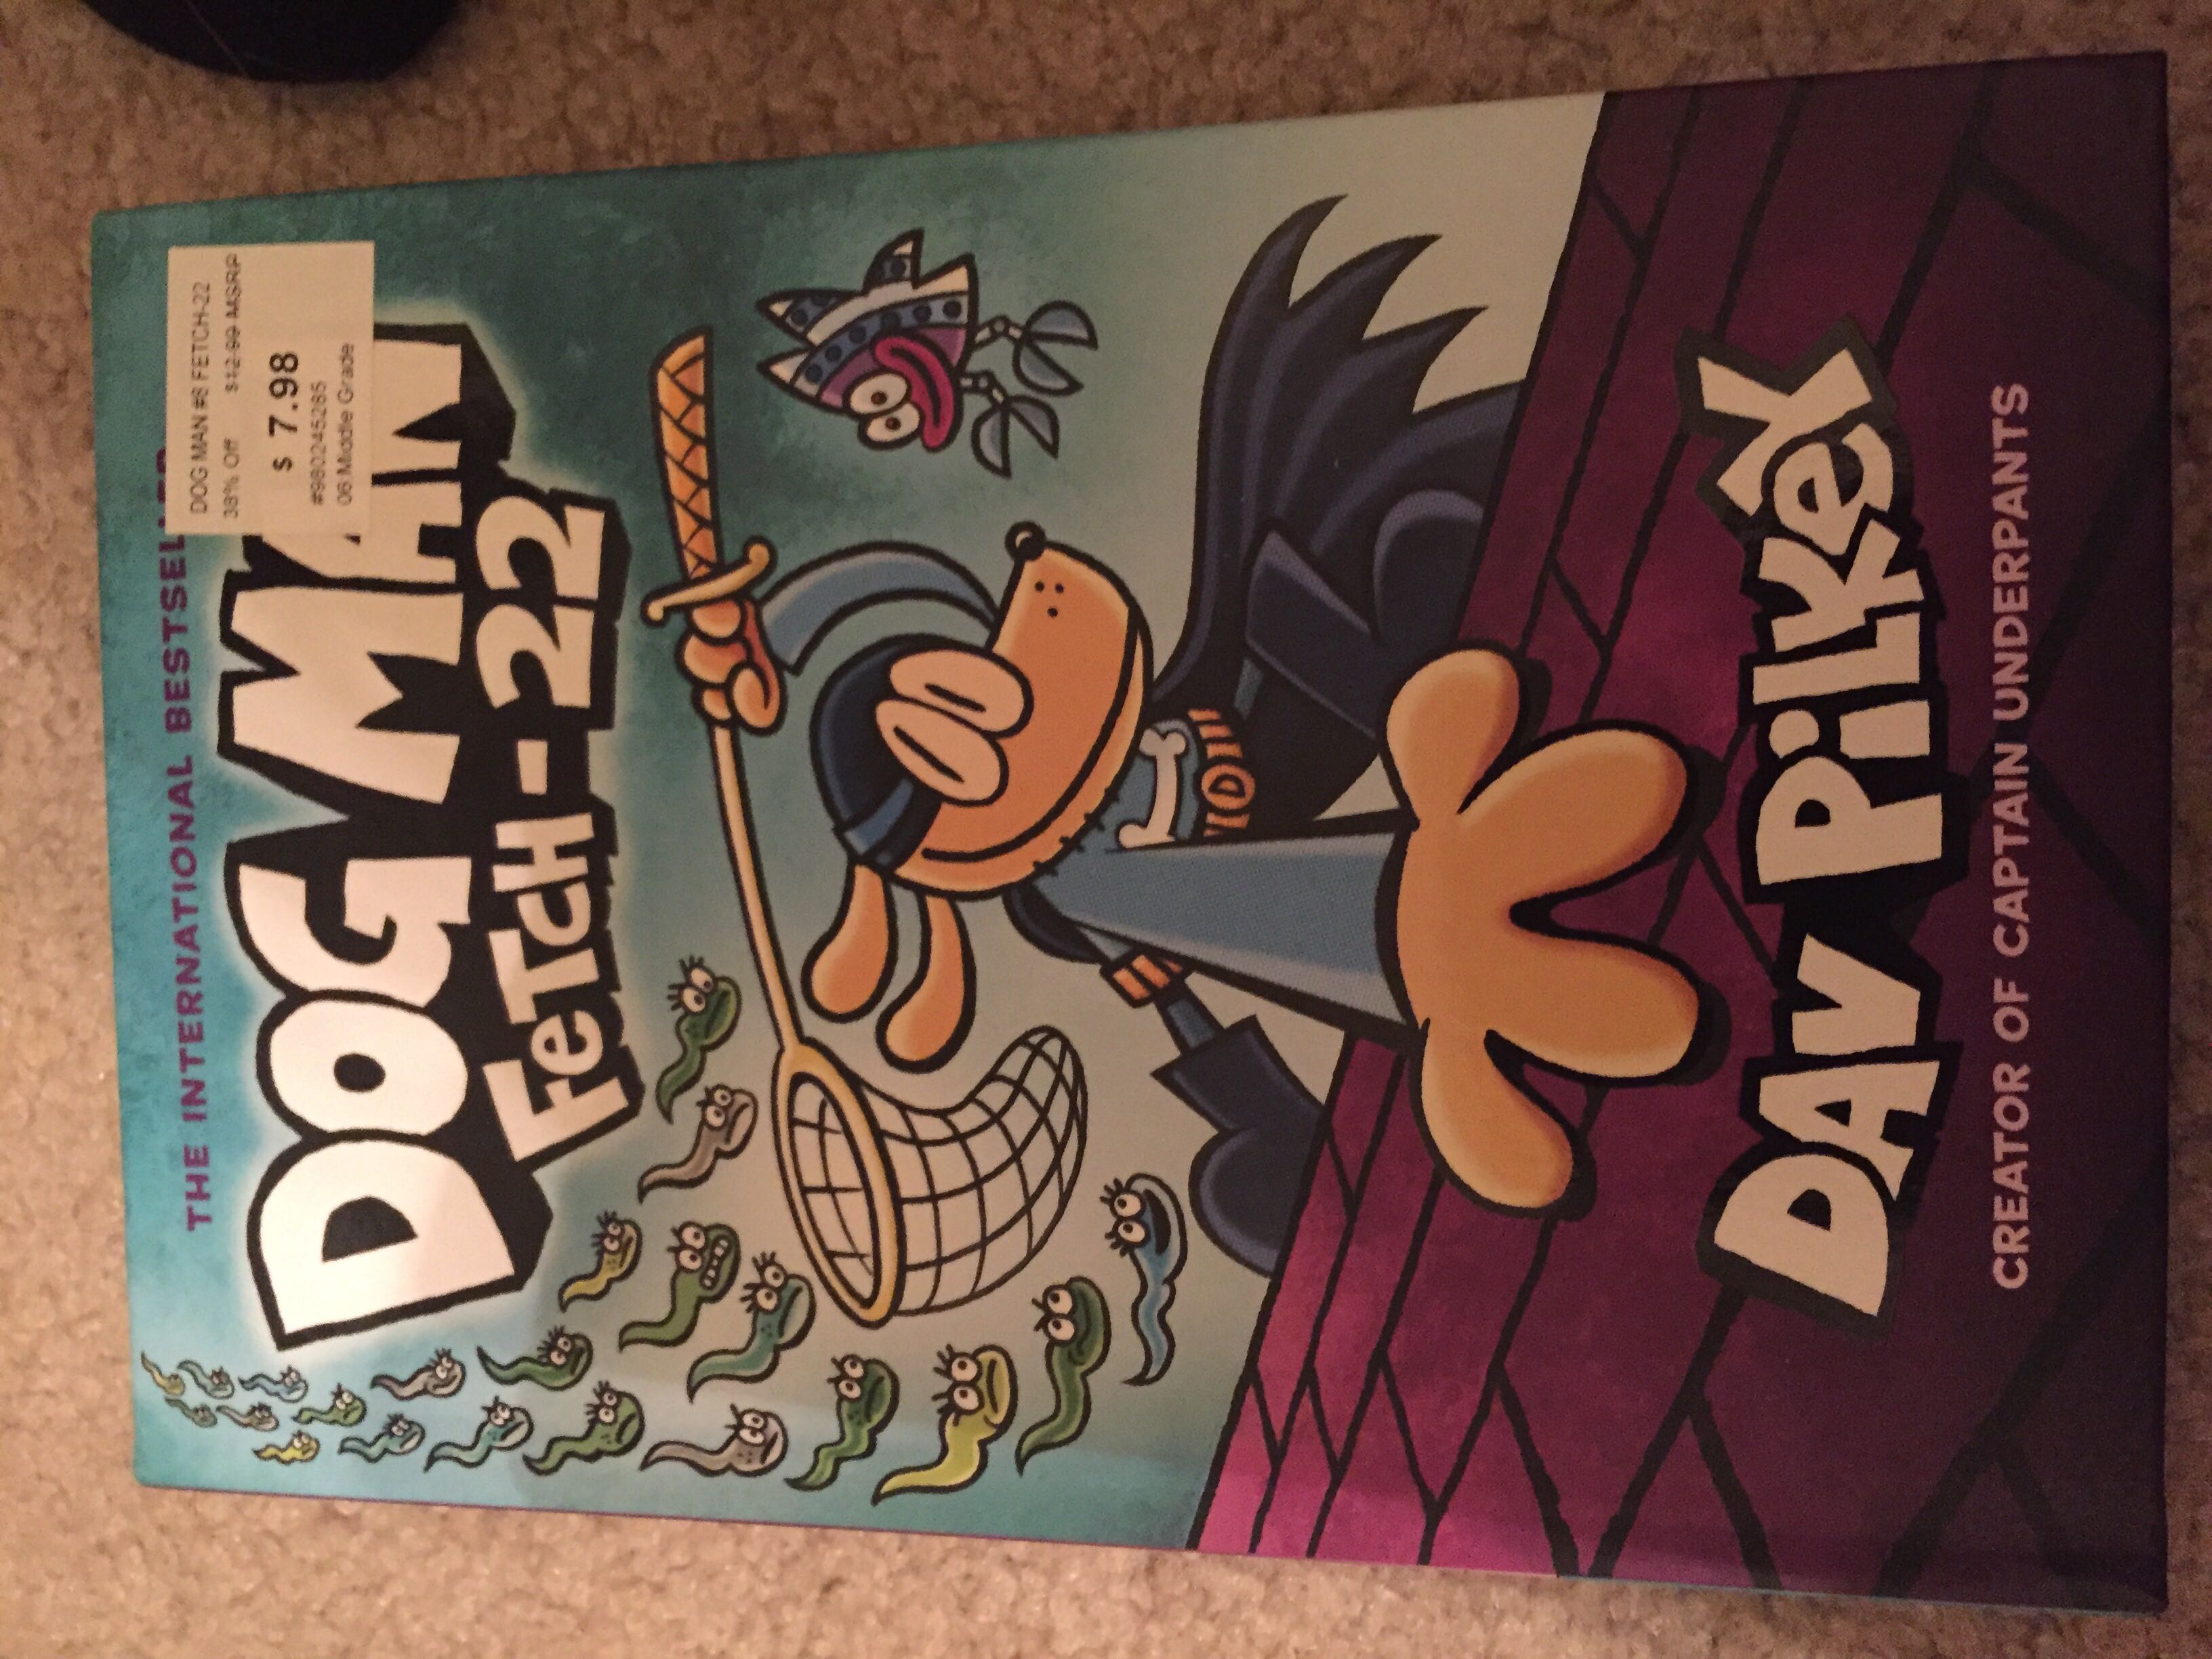 Dog Man #8: Fetch-22 - Dav Pilkey (On the first shelf - Hardcover) book collectible [Barcode 9781338323214] - Main Image 1